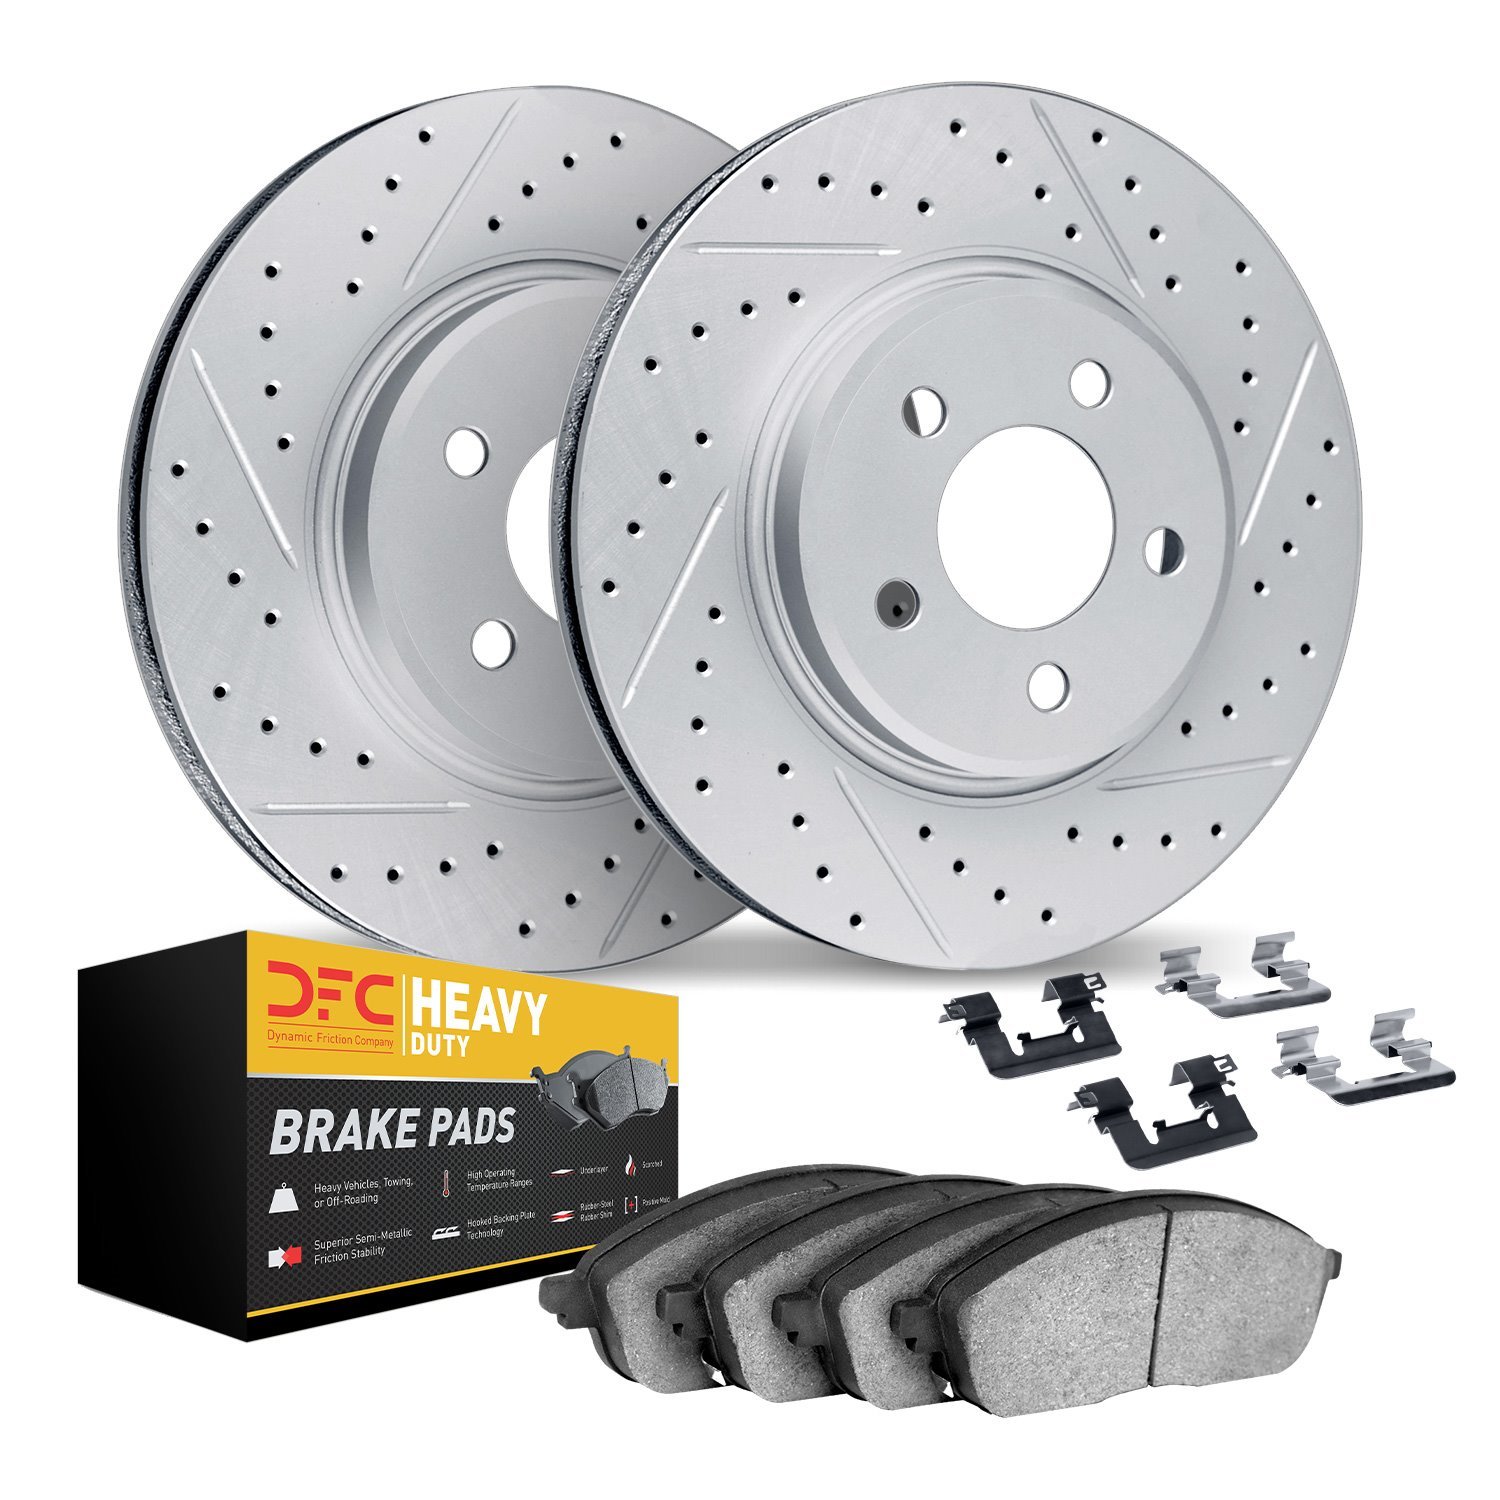 2212-99109 Geoperformance Drilled/Slotted Rotors w/Heavy-Duty Pads Kit & Hardware, 1998-2002 Ford/Lincoln/Mercury/Mazda, Positio